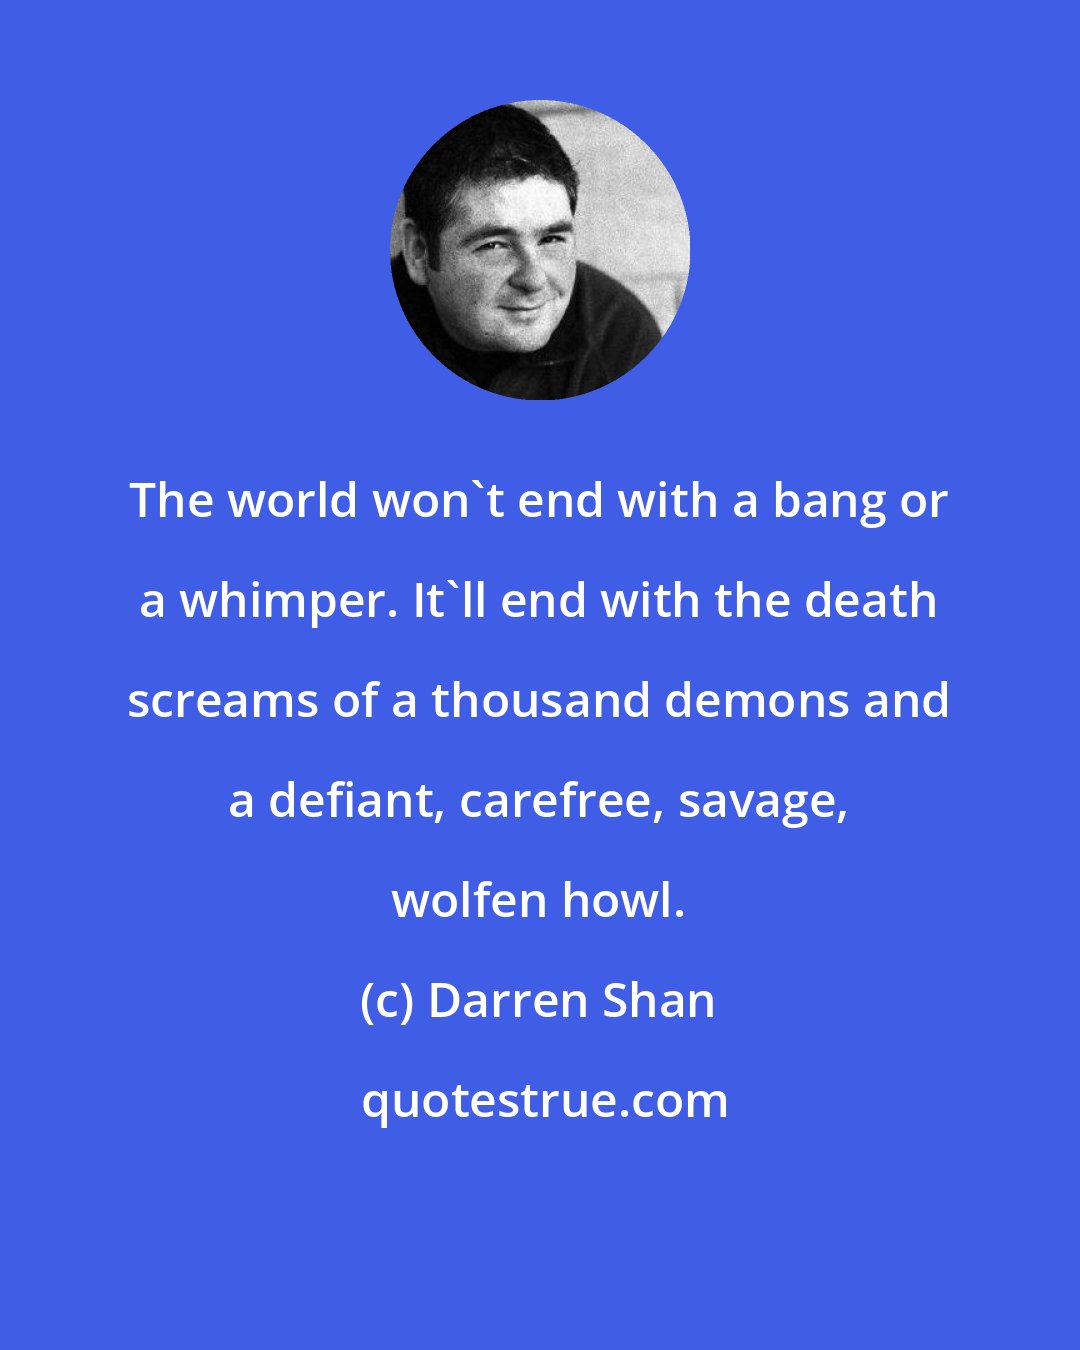 Darren Shan: The world won't end with a bang or a whimper. It'll end with the death screams of a thousand demons and a defiant, carefree, savage, wolfen howl.